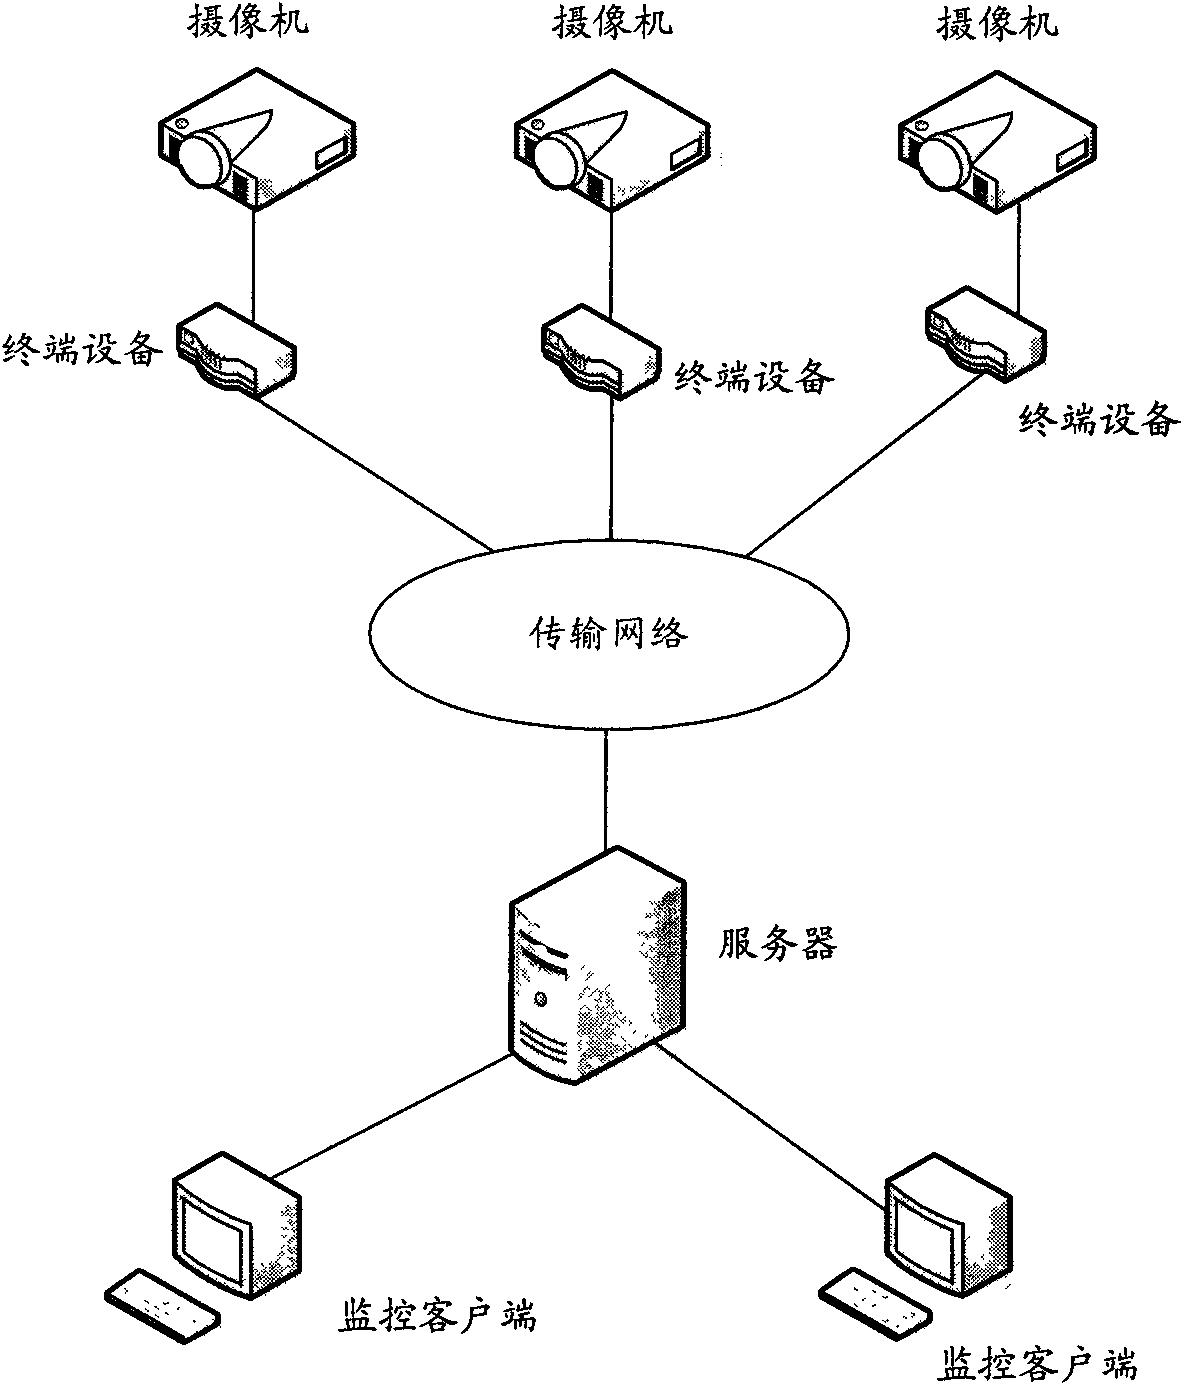 Pan/ tilt/ zoom (PTZ) camera control method, device and system thereof